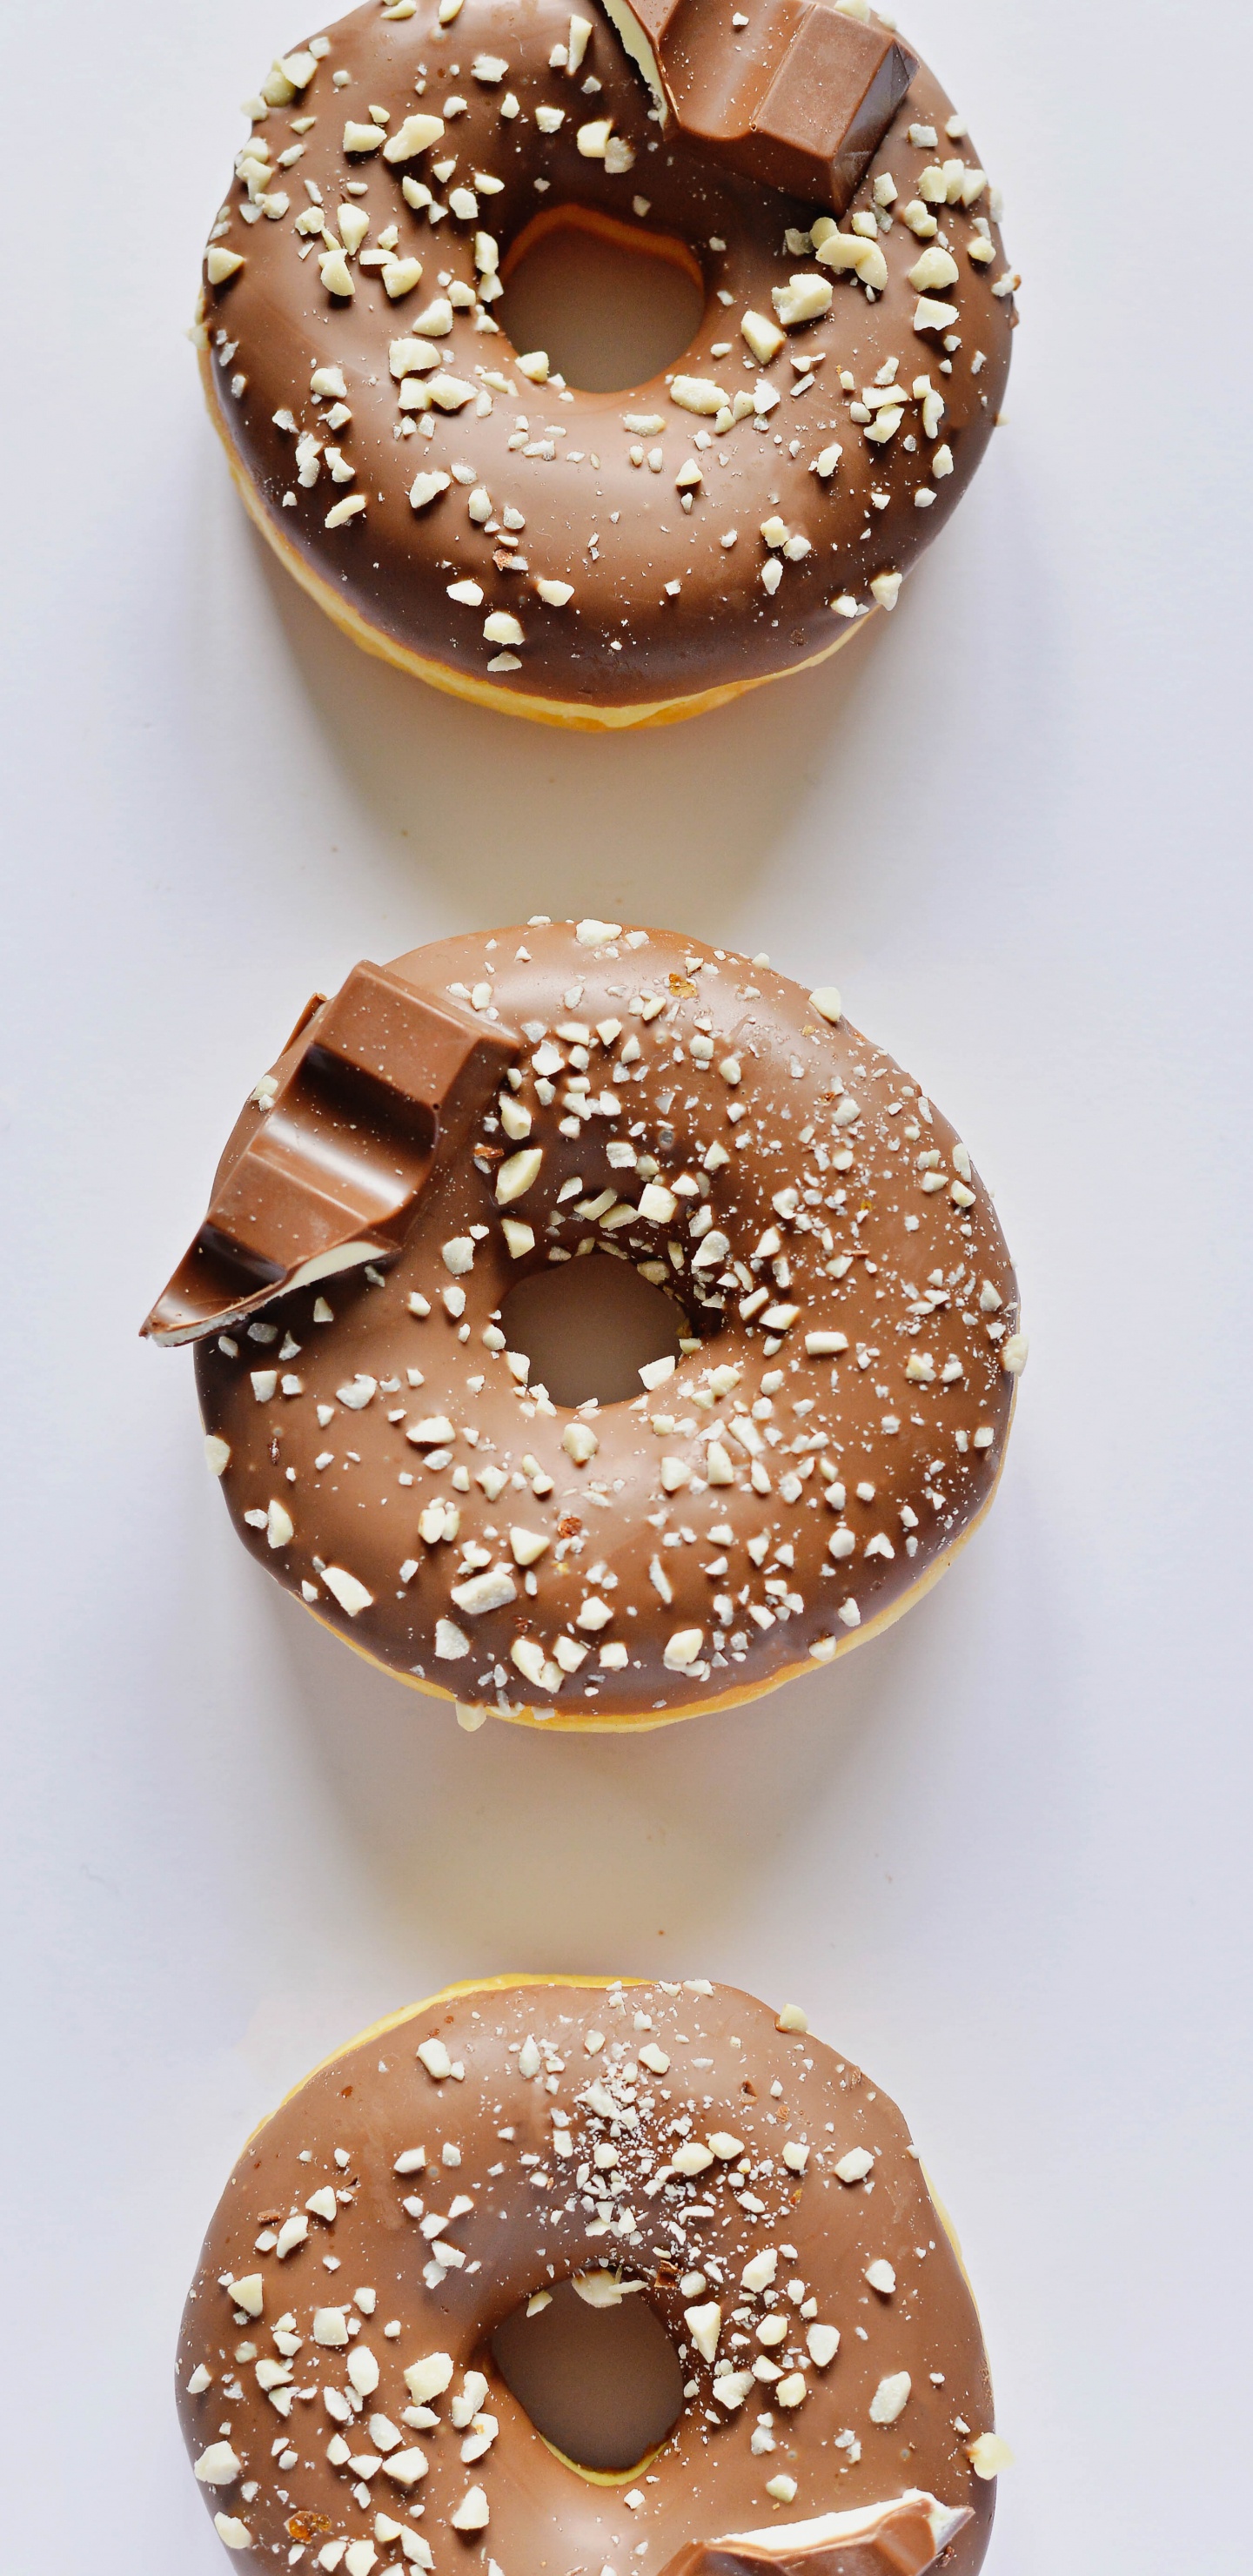 Brown Donut on White Table. Wallpaper in 1440x2960 Resolution